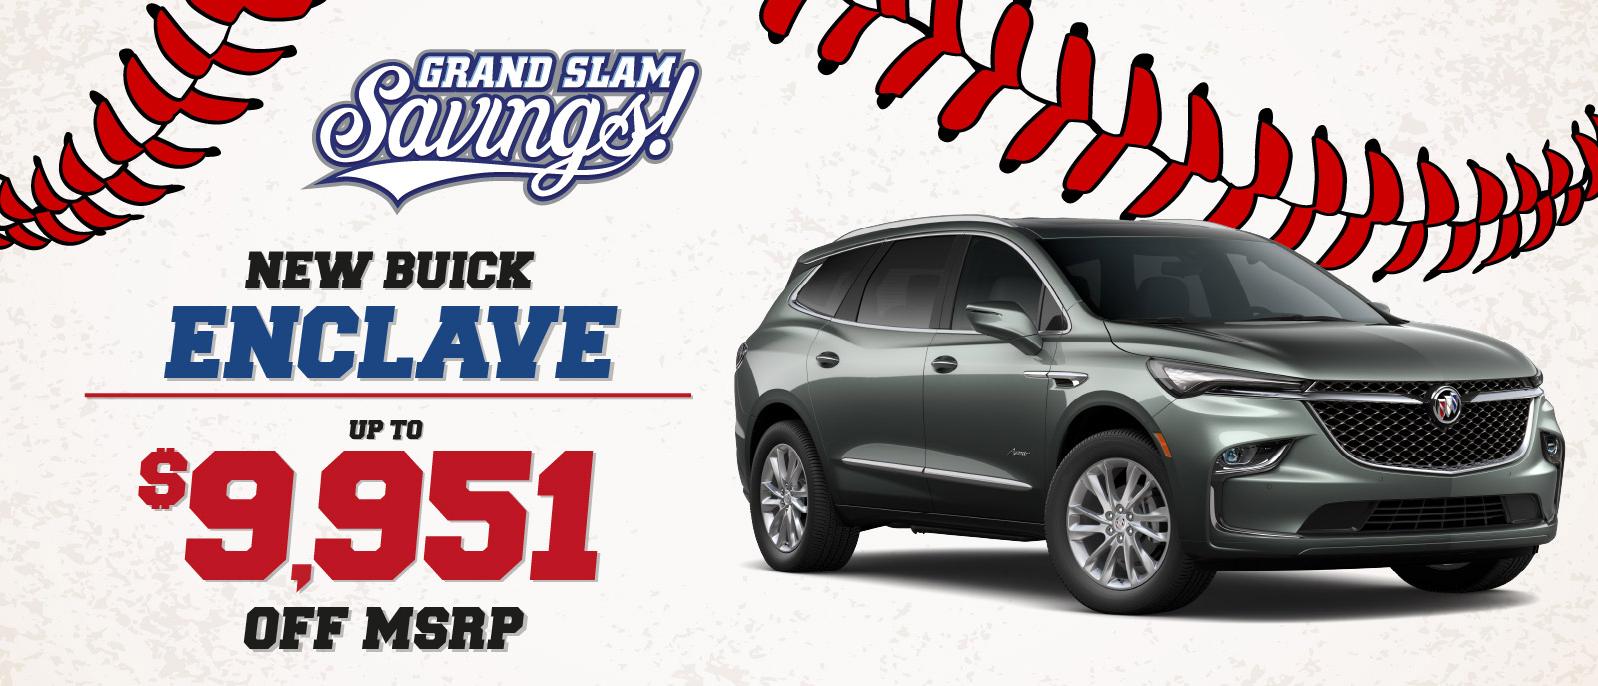 New Buick Enclave - SAVE up to $9951